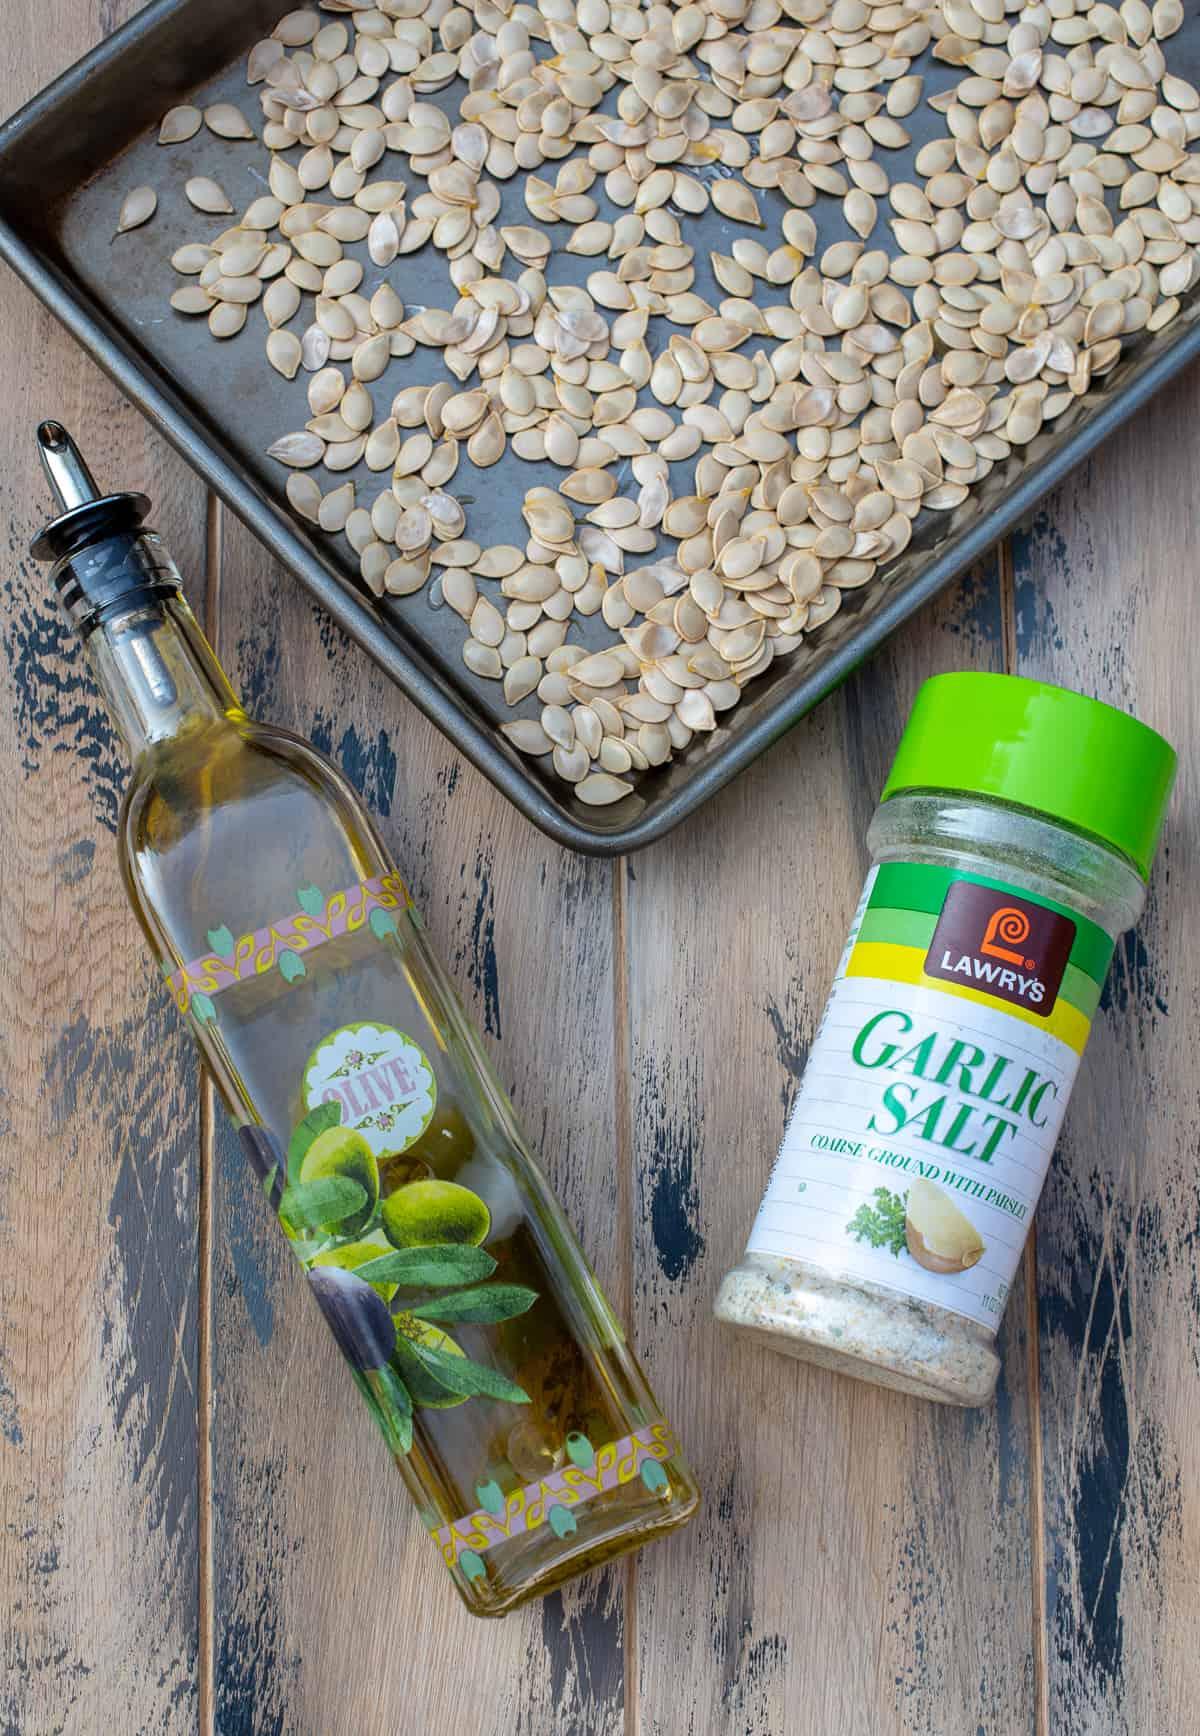 A top down shot of acorn squash seeds on a baking sheet, a glass bottle of olive oil, and a container of garlic salt on a brown board.